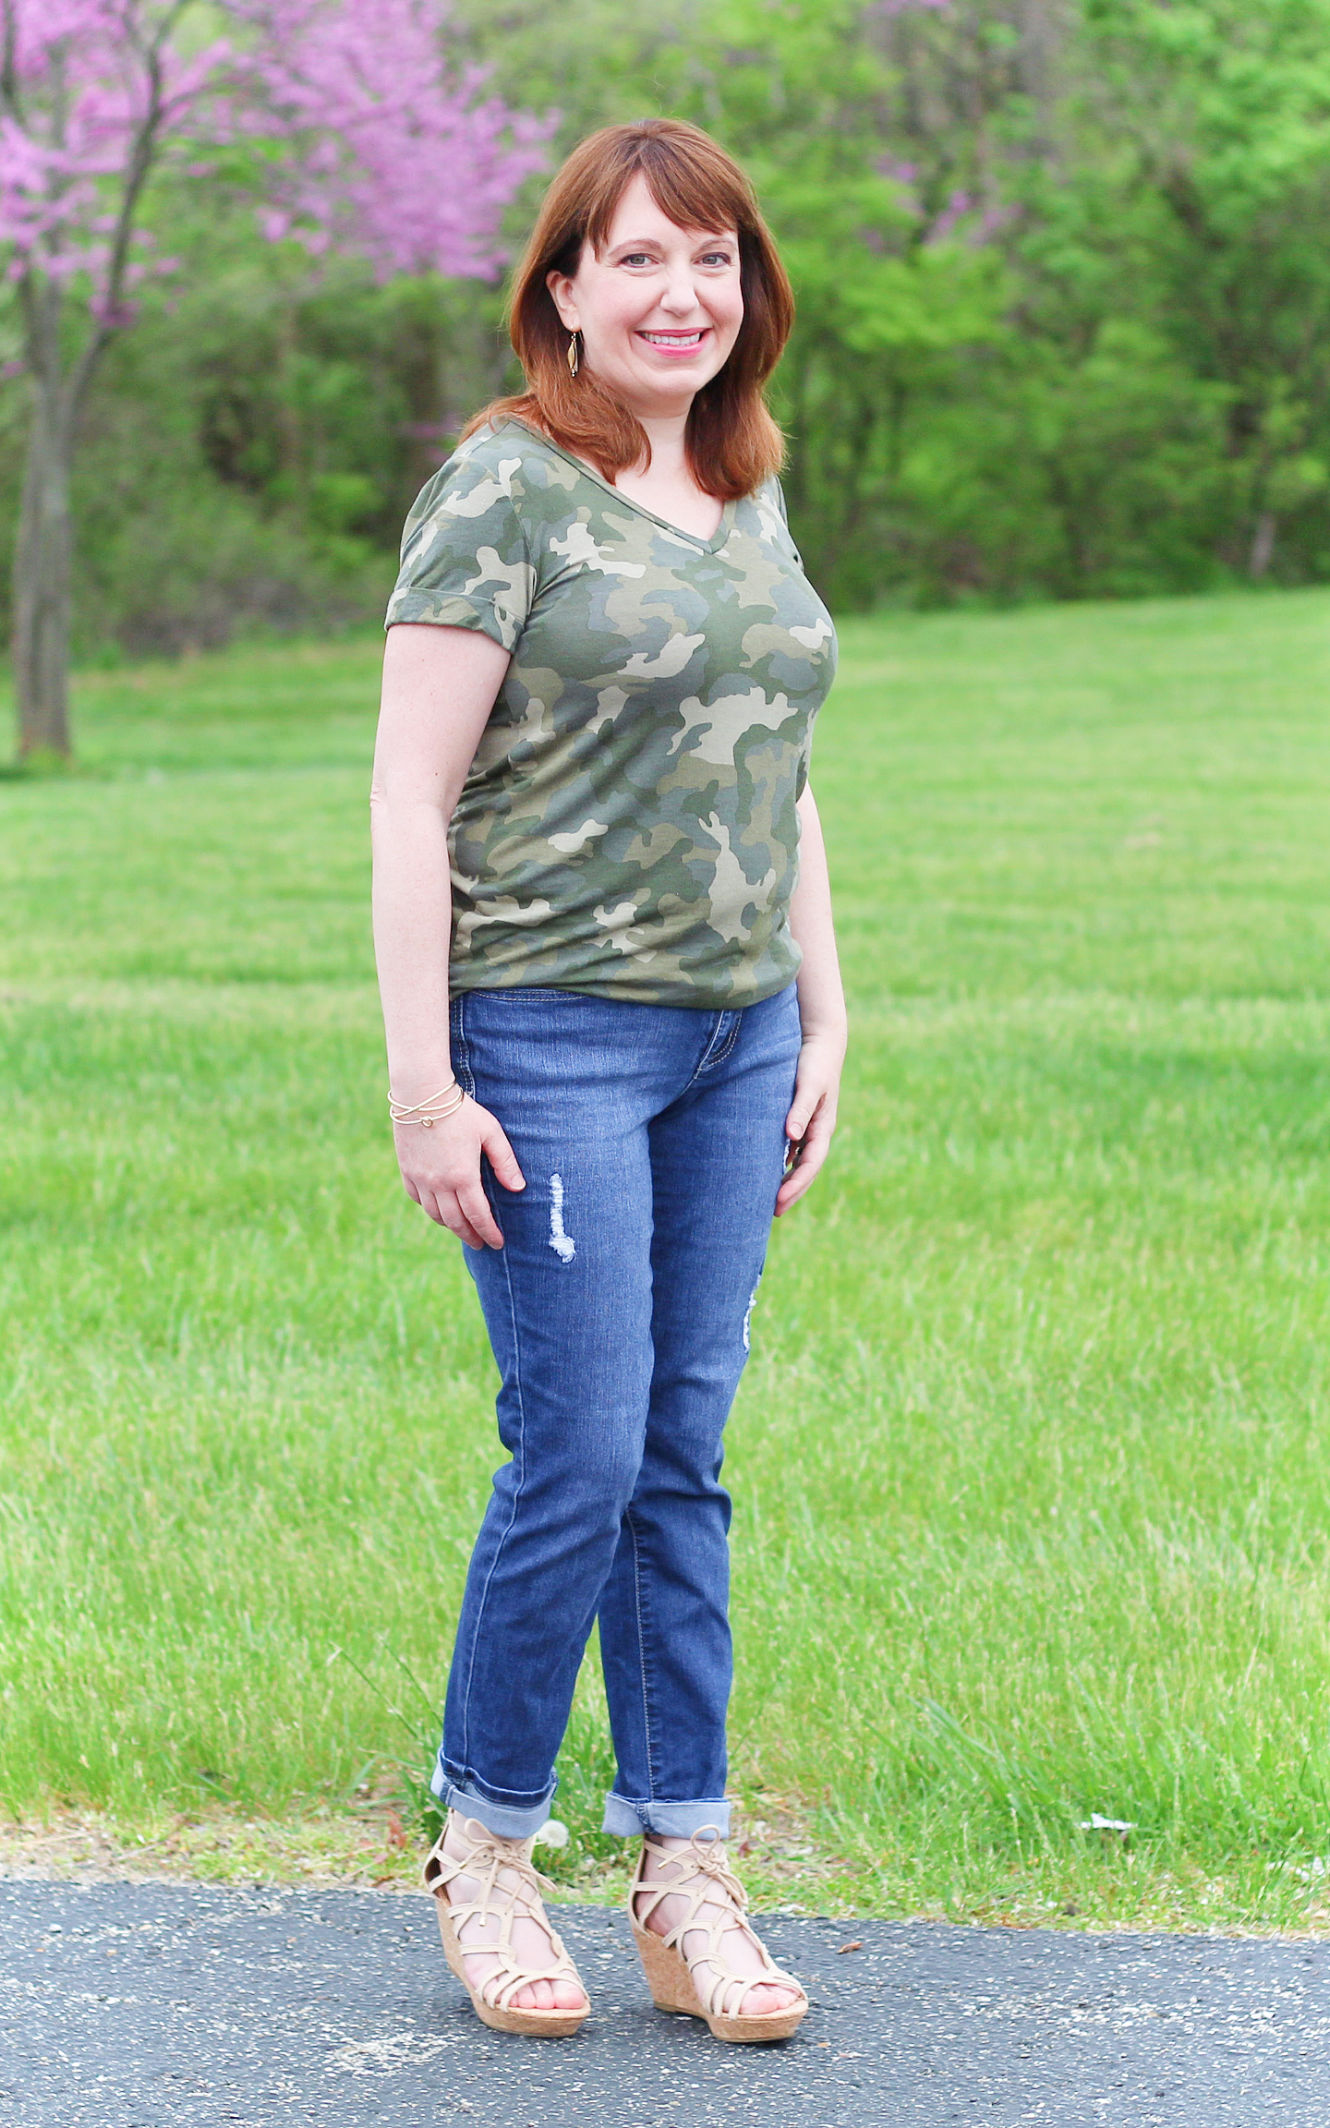 Camo Tee And Jeans Spring Outfit #fsashion #style #over40fashion